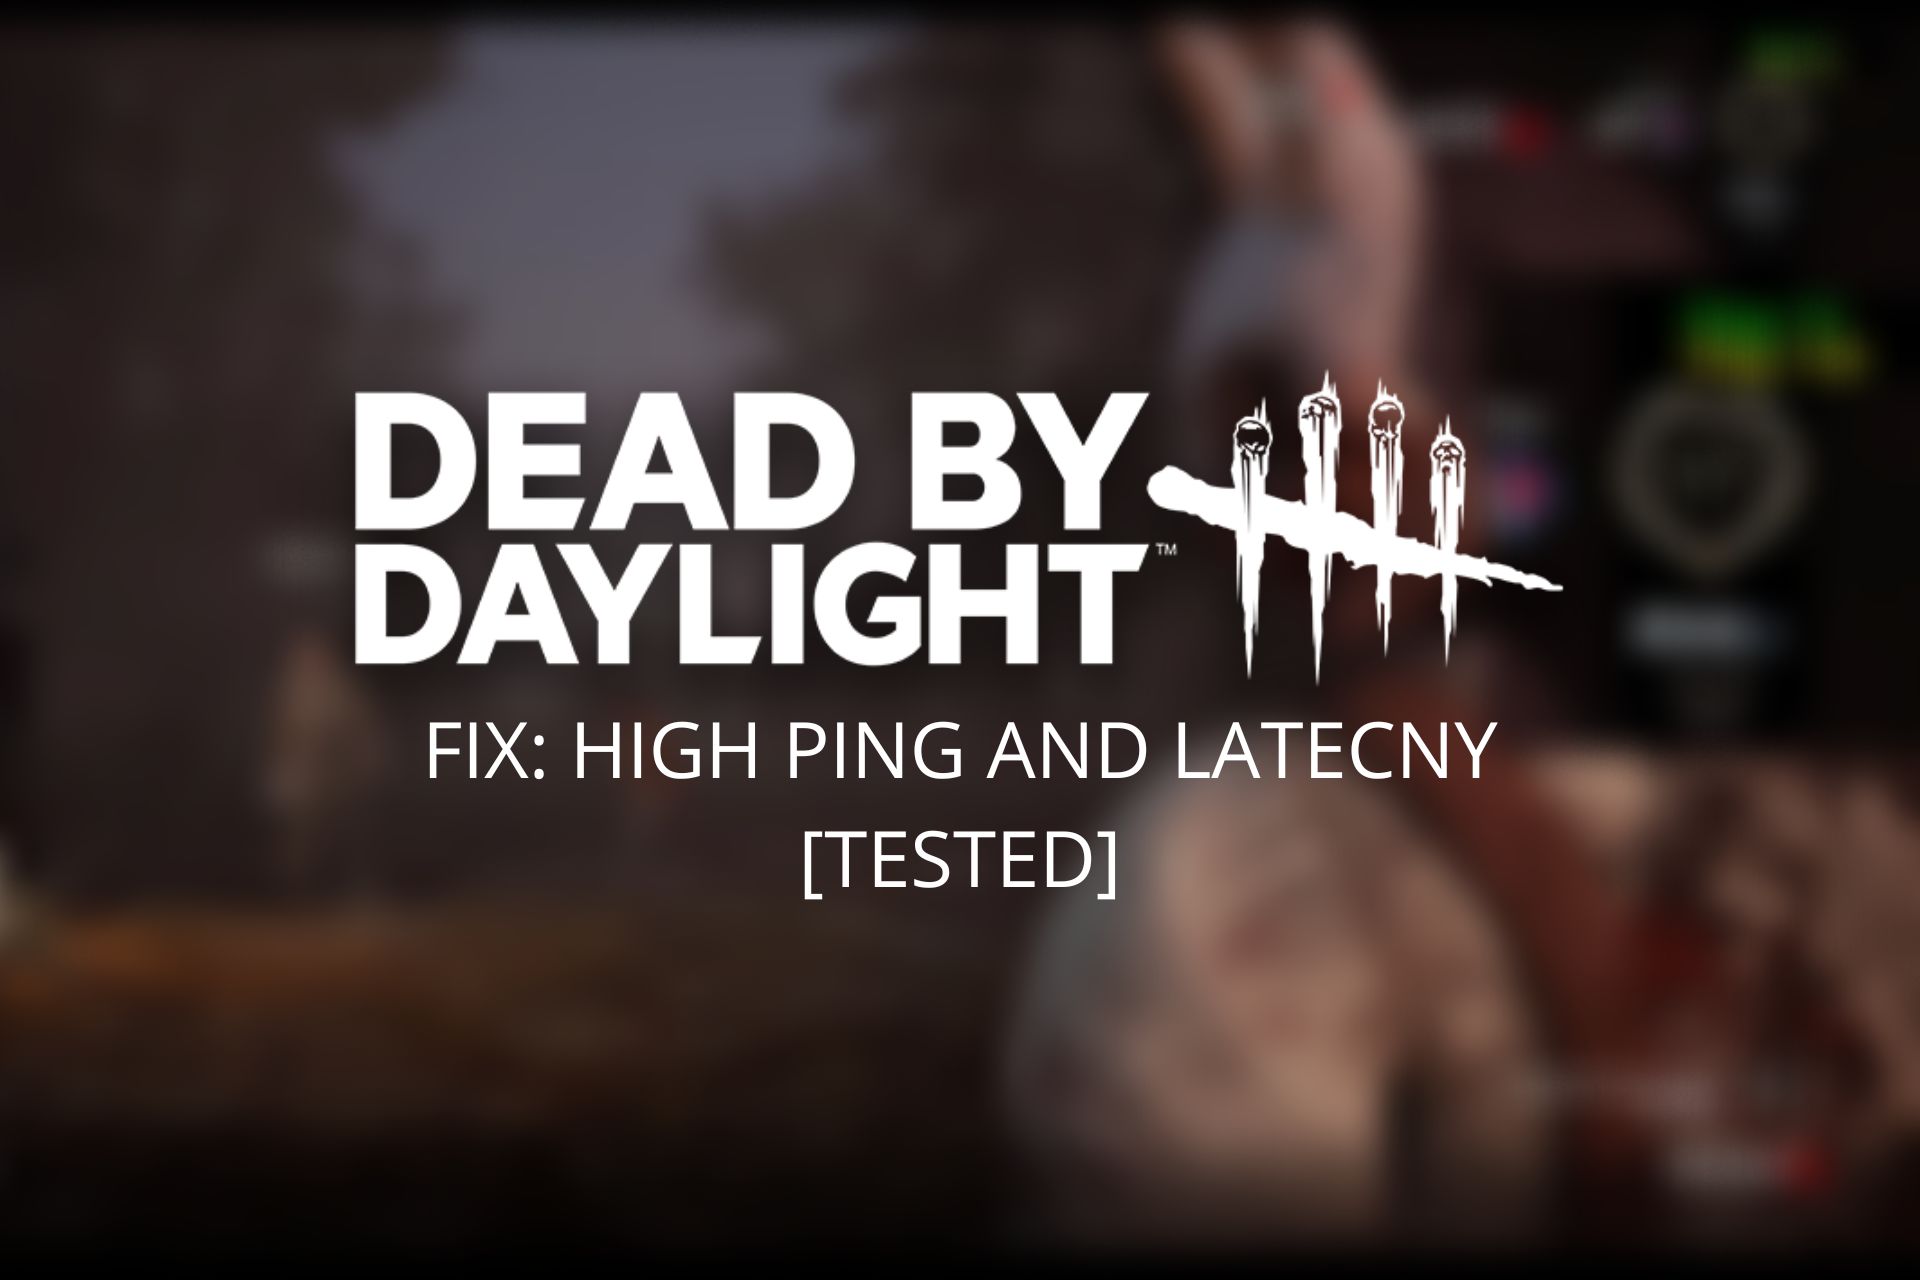 5 Quick Ways to Fix High Ping & Latency in Dead by Daylight